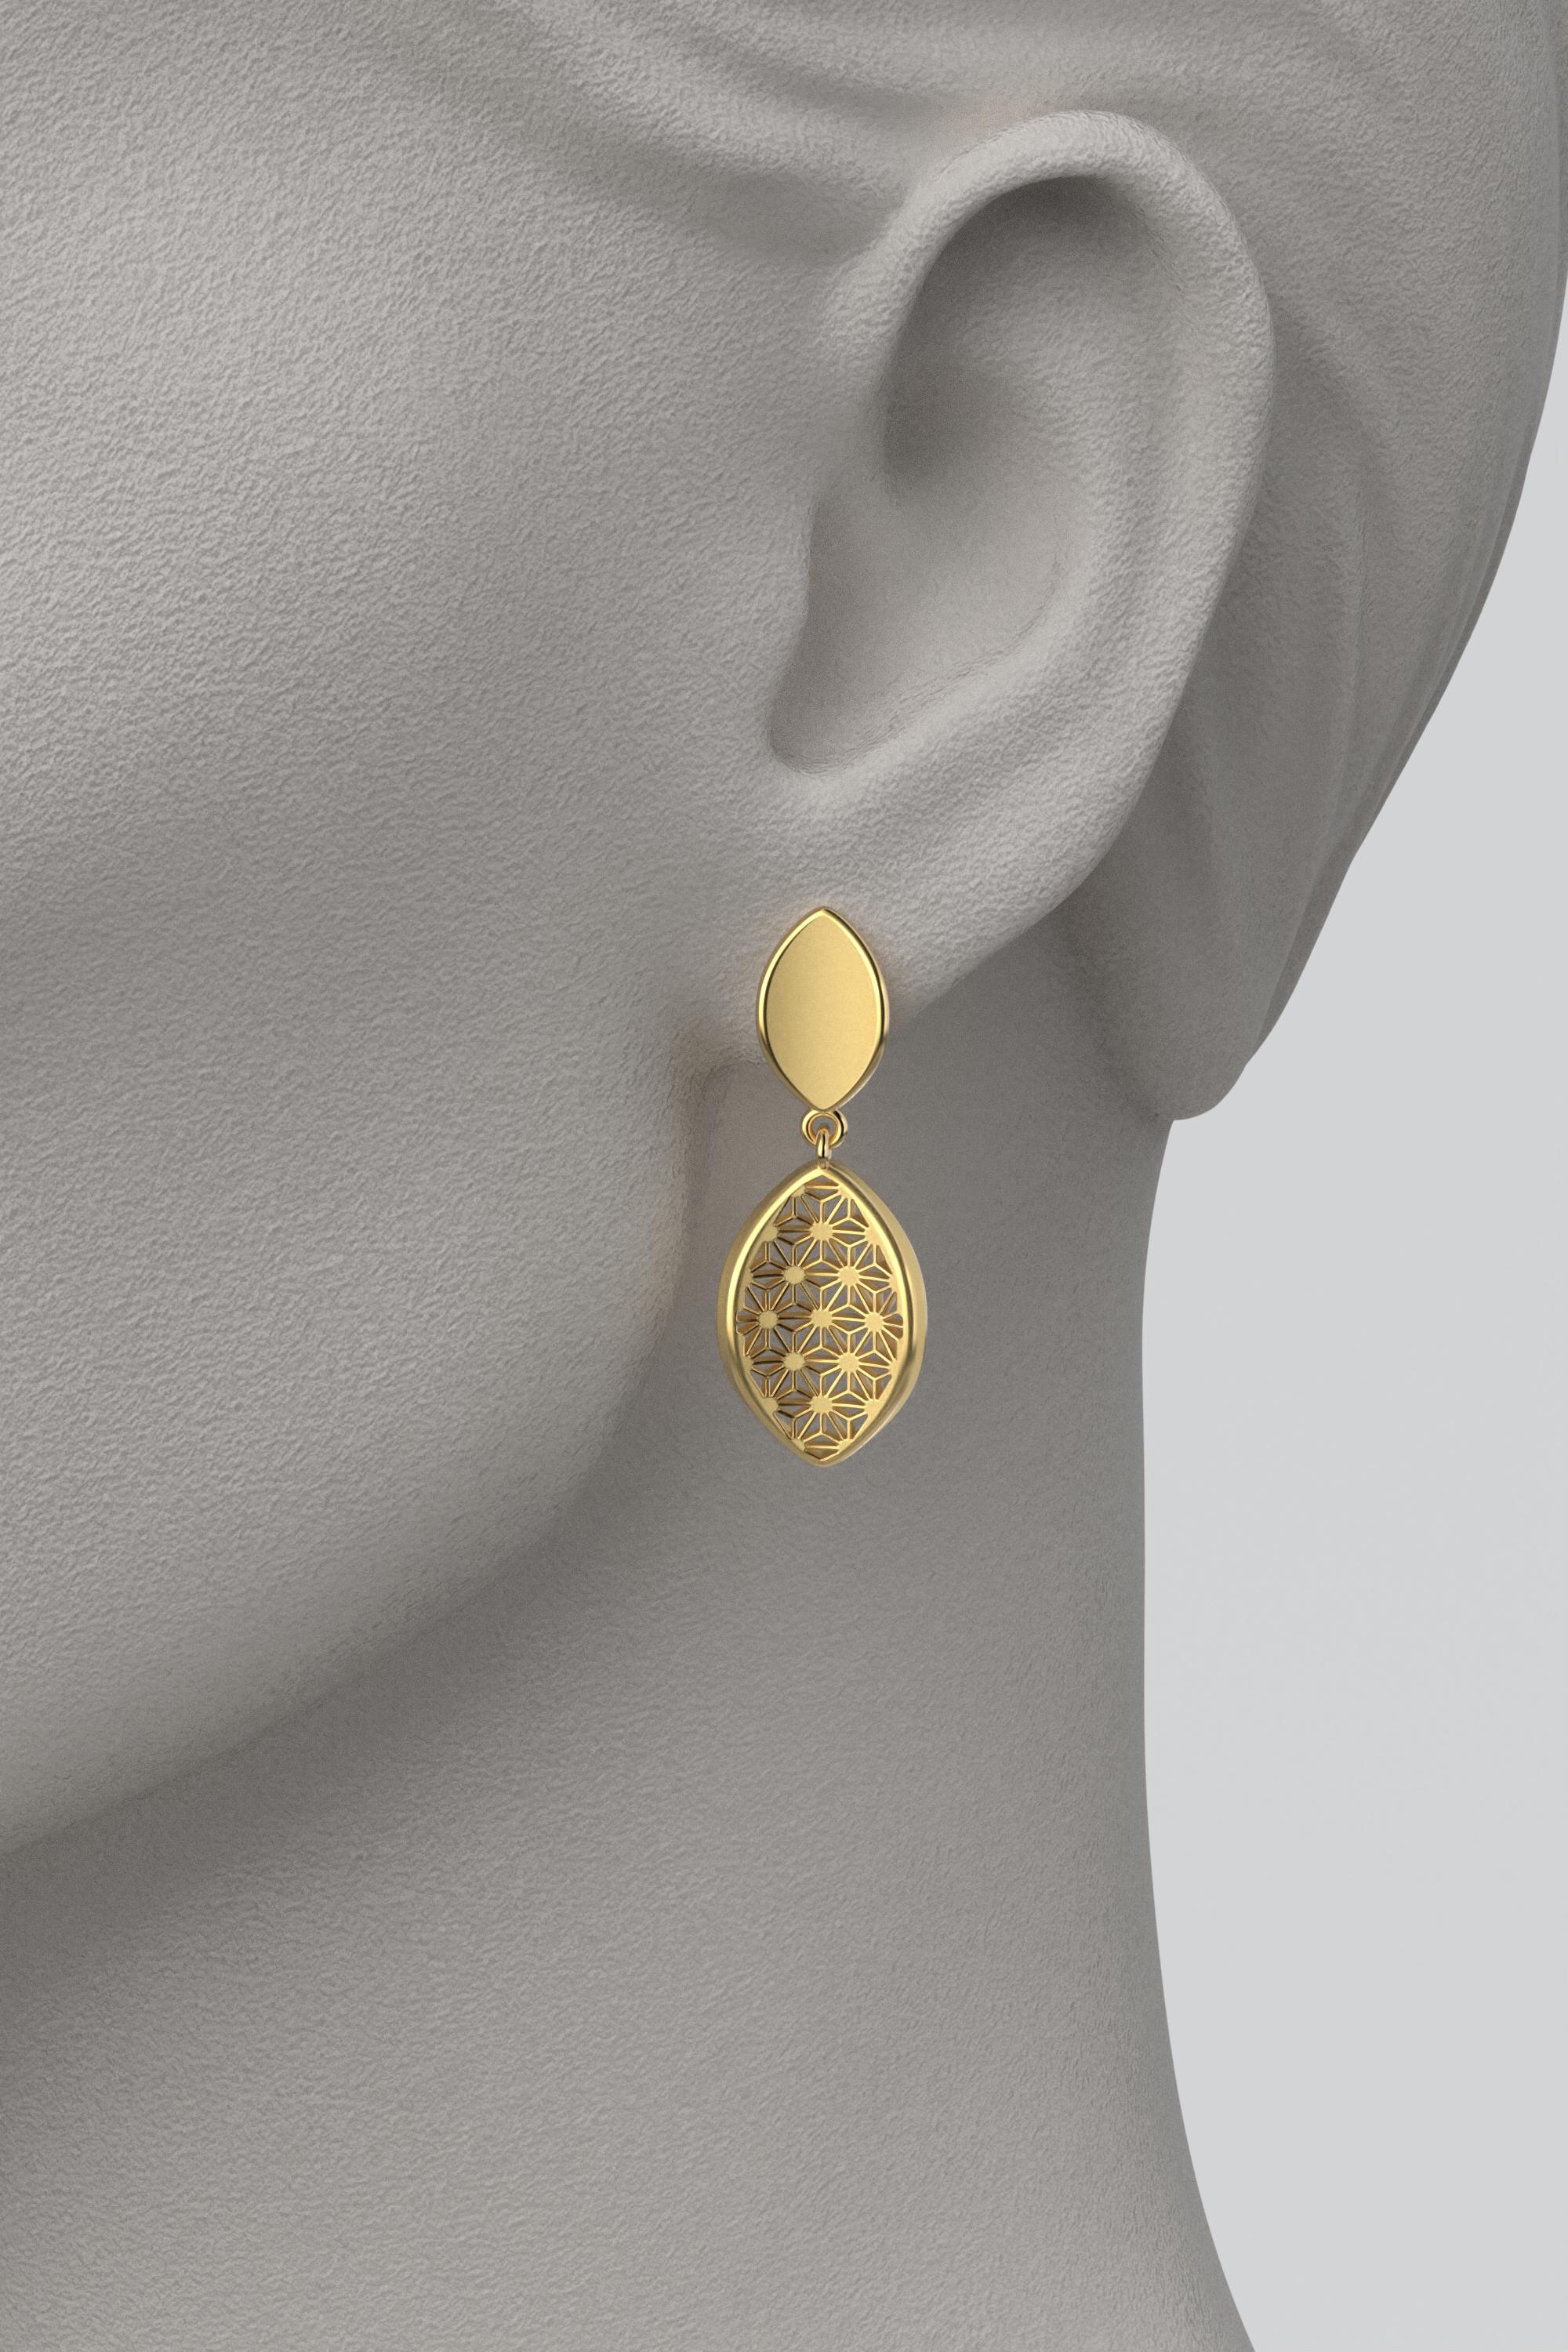 Sashiko Pattern Earrings Made in Italy in 18k Gold By Oltremare Gioielli In New Condition For Sale In Camisano Vicentino, VI